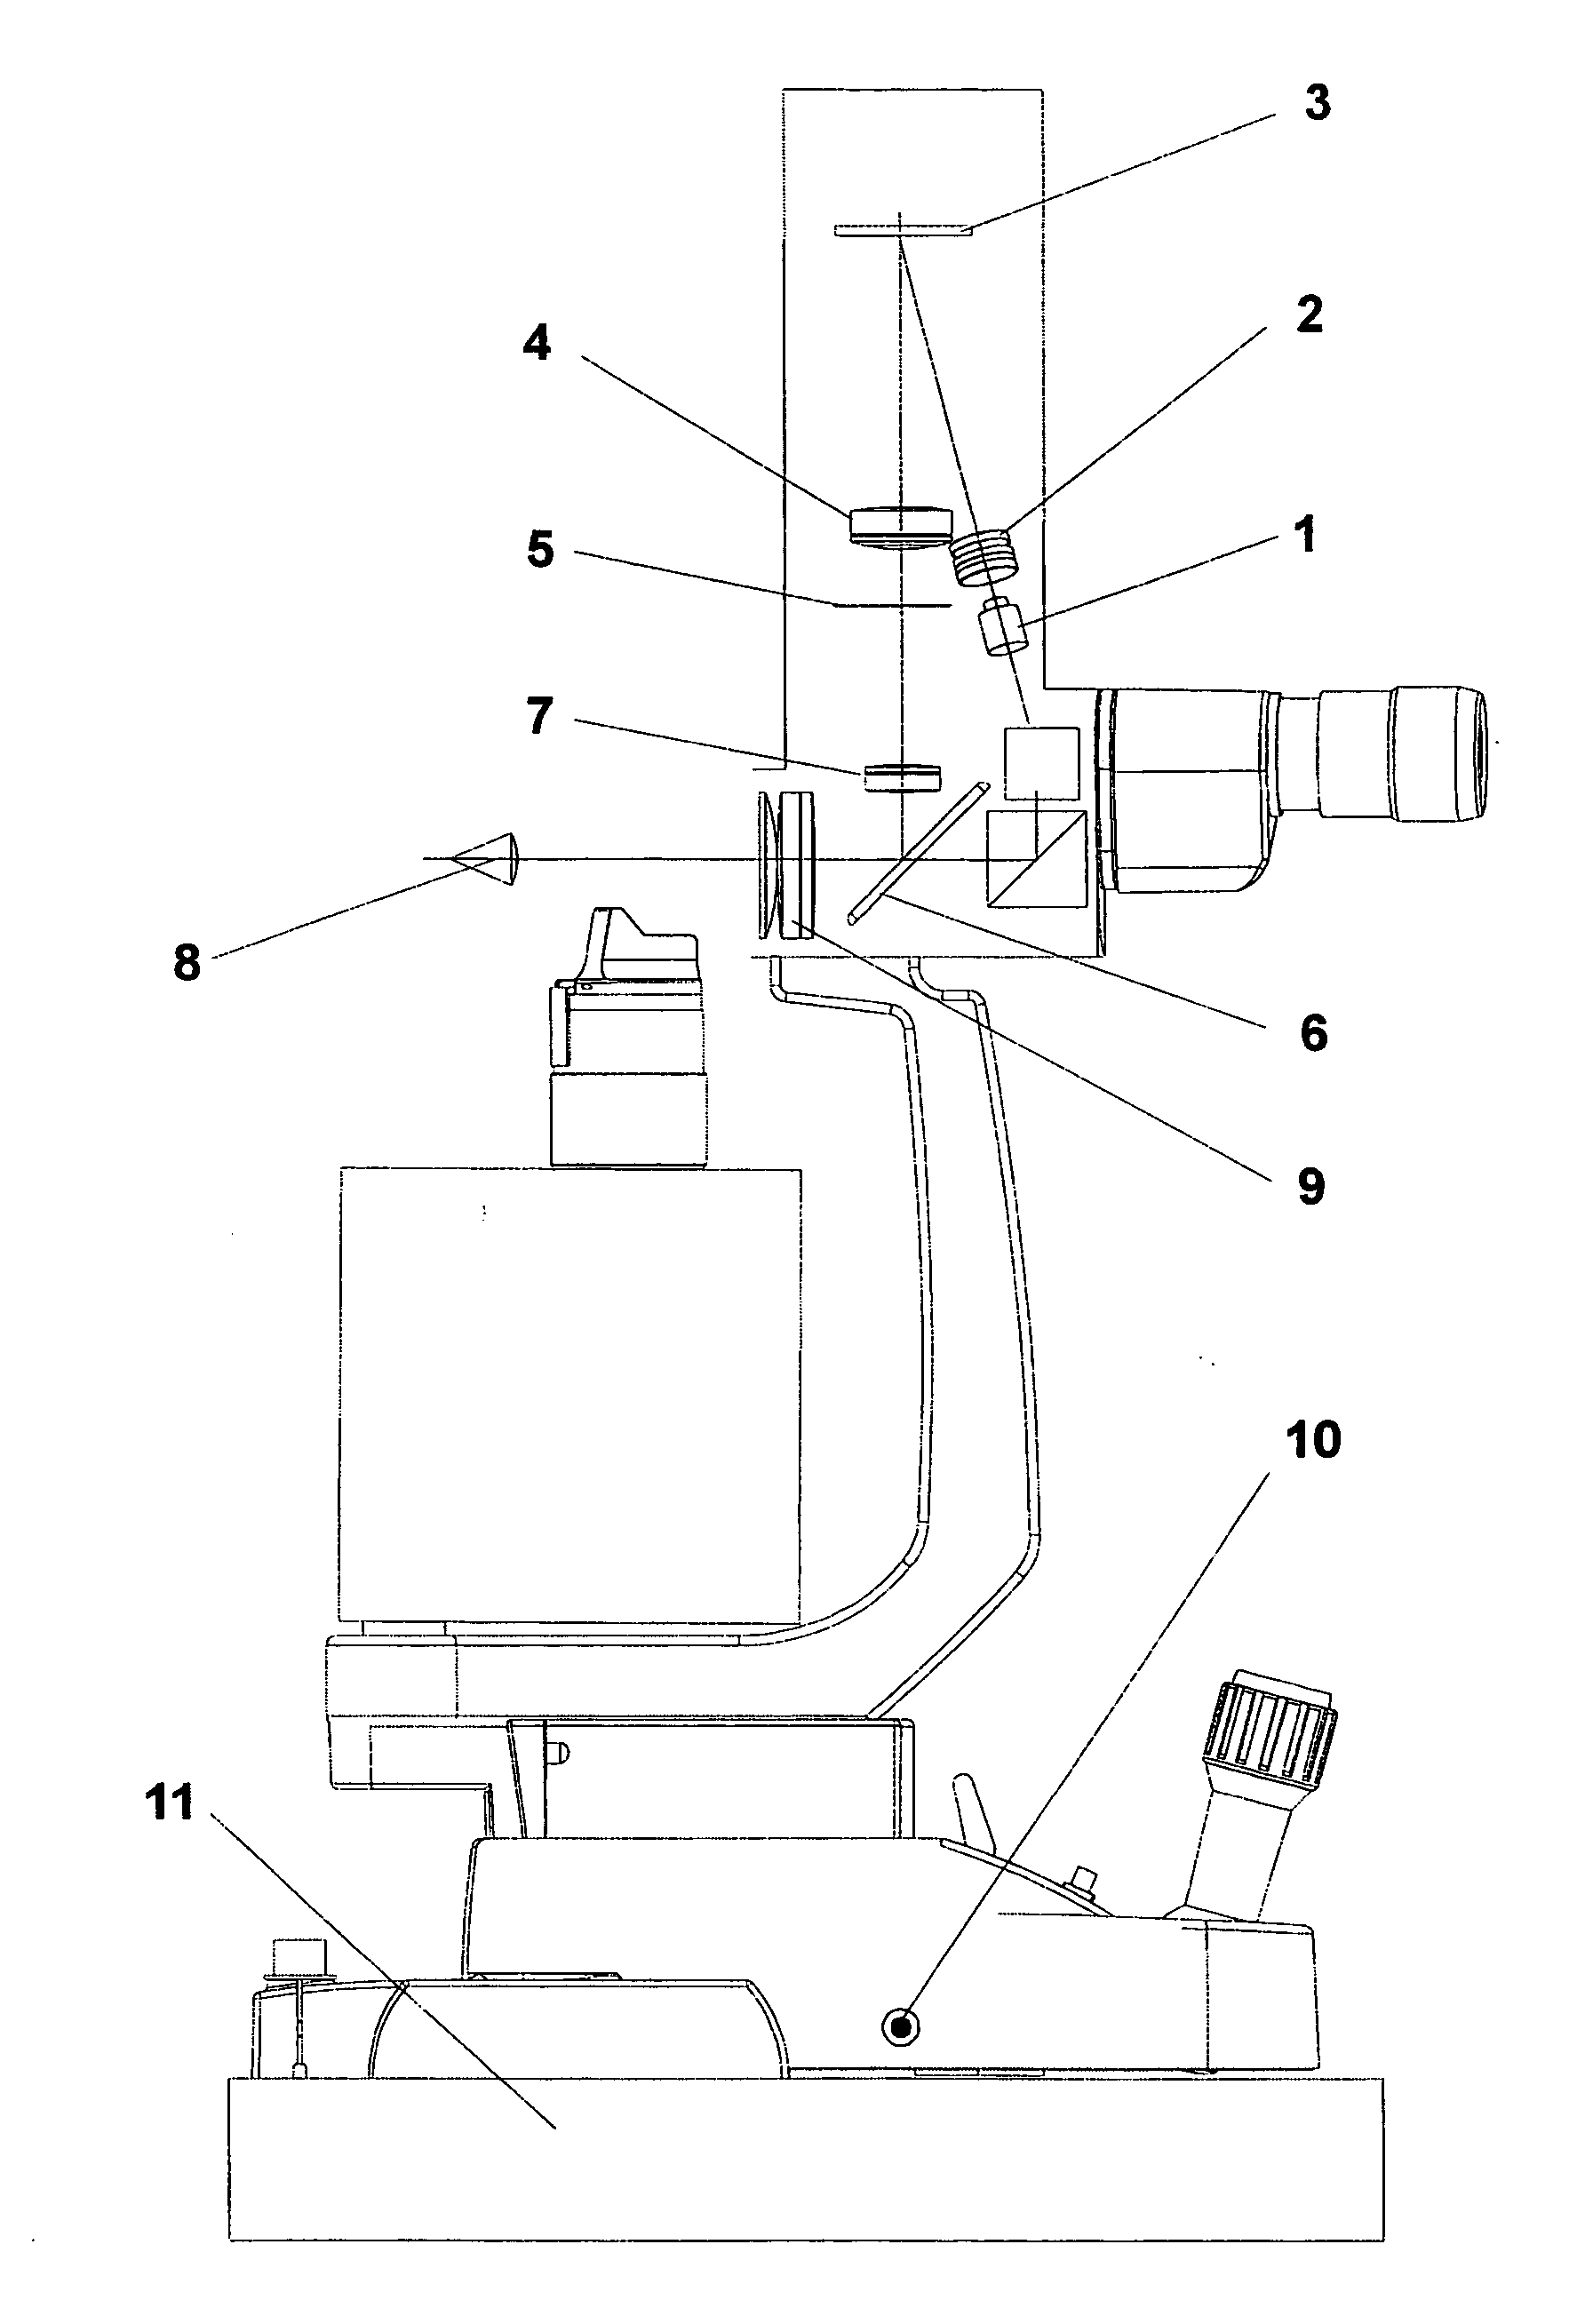 Illumination and irradiation unit for ophthalmologic devices